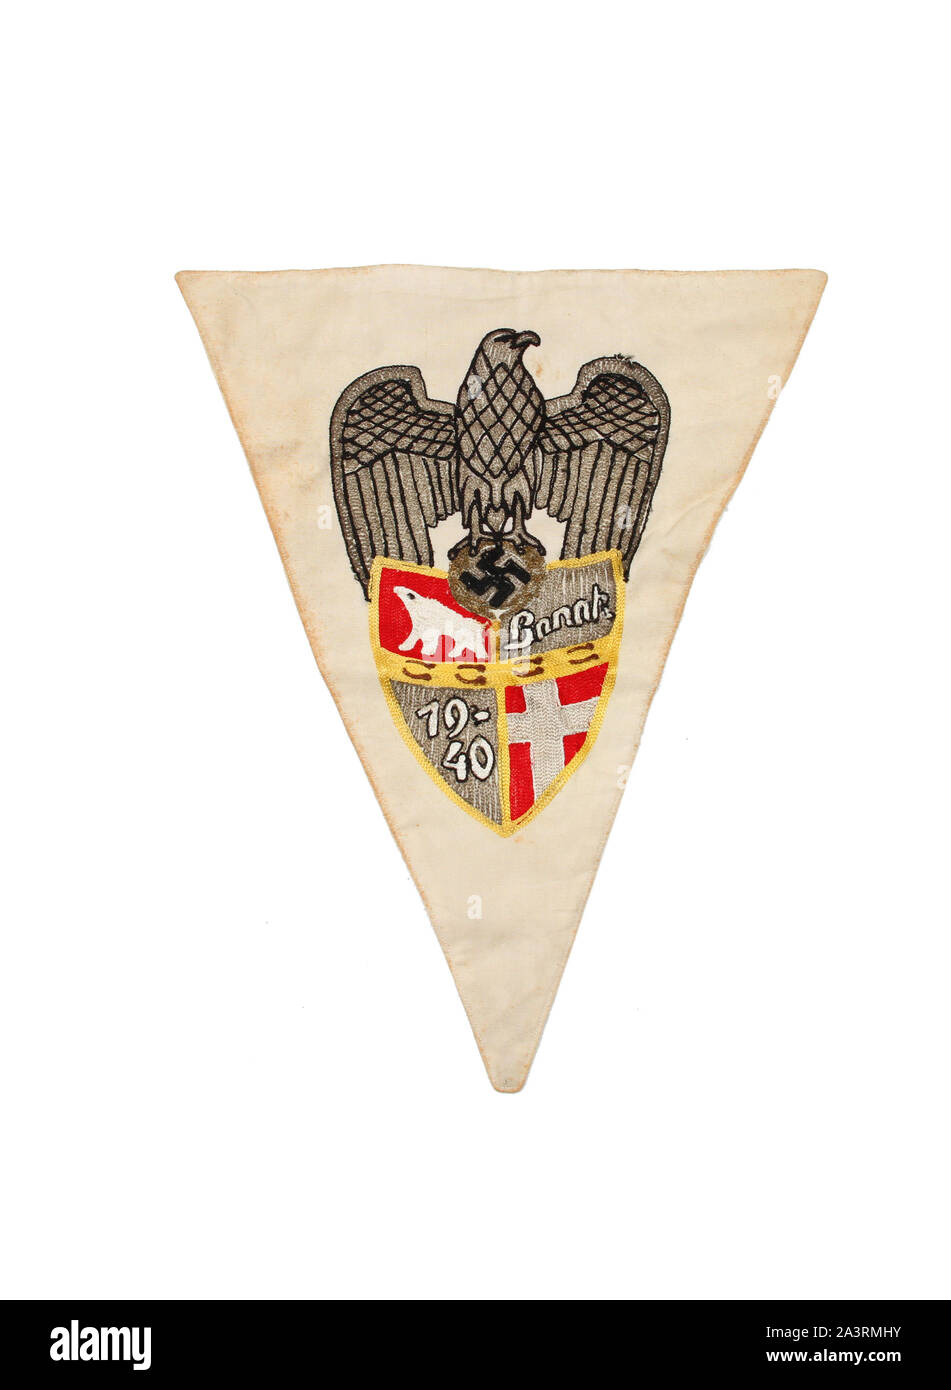 Second World War Pennant and Pin, Lapland Campaign. German WWII banner with matching pin, banner is sewn with brocade and silk. Stock Photo